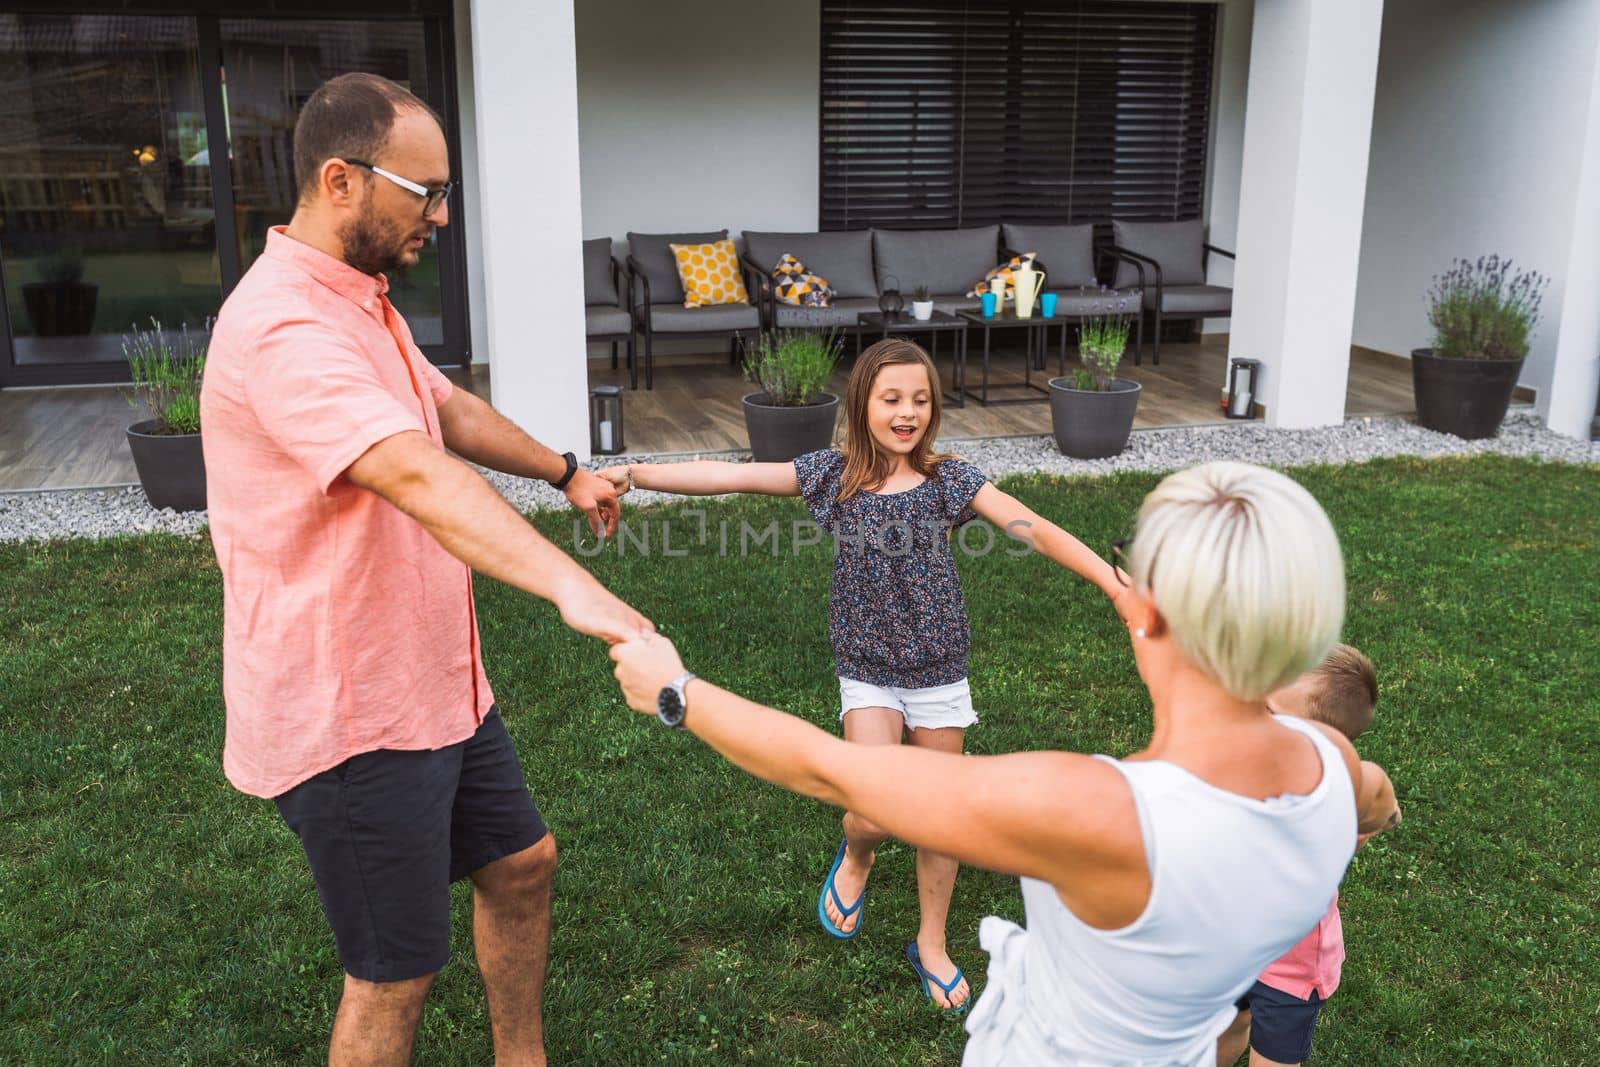 Happy caucasian family of four, mother father and children at home, outdoors playing on the grass, and indoors in the living room having fun as a family.